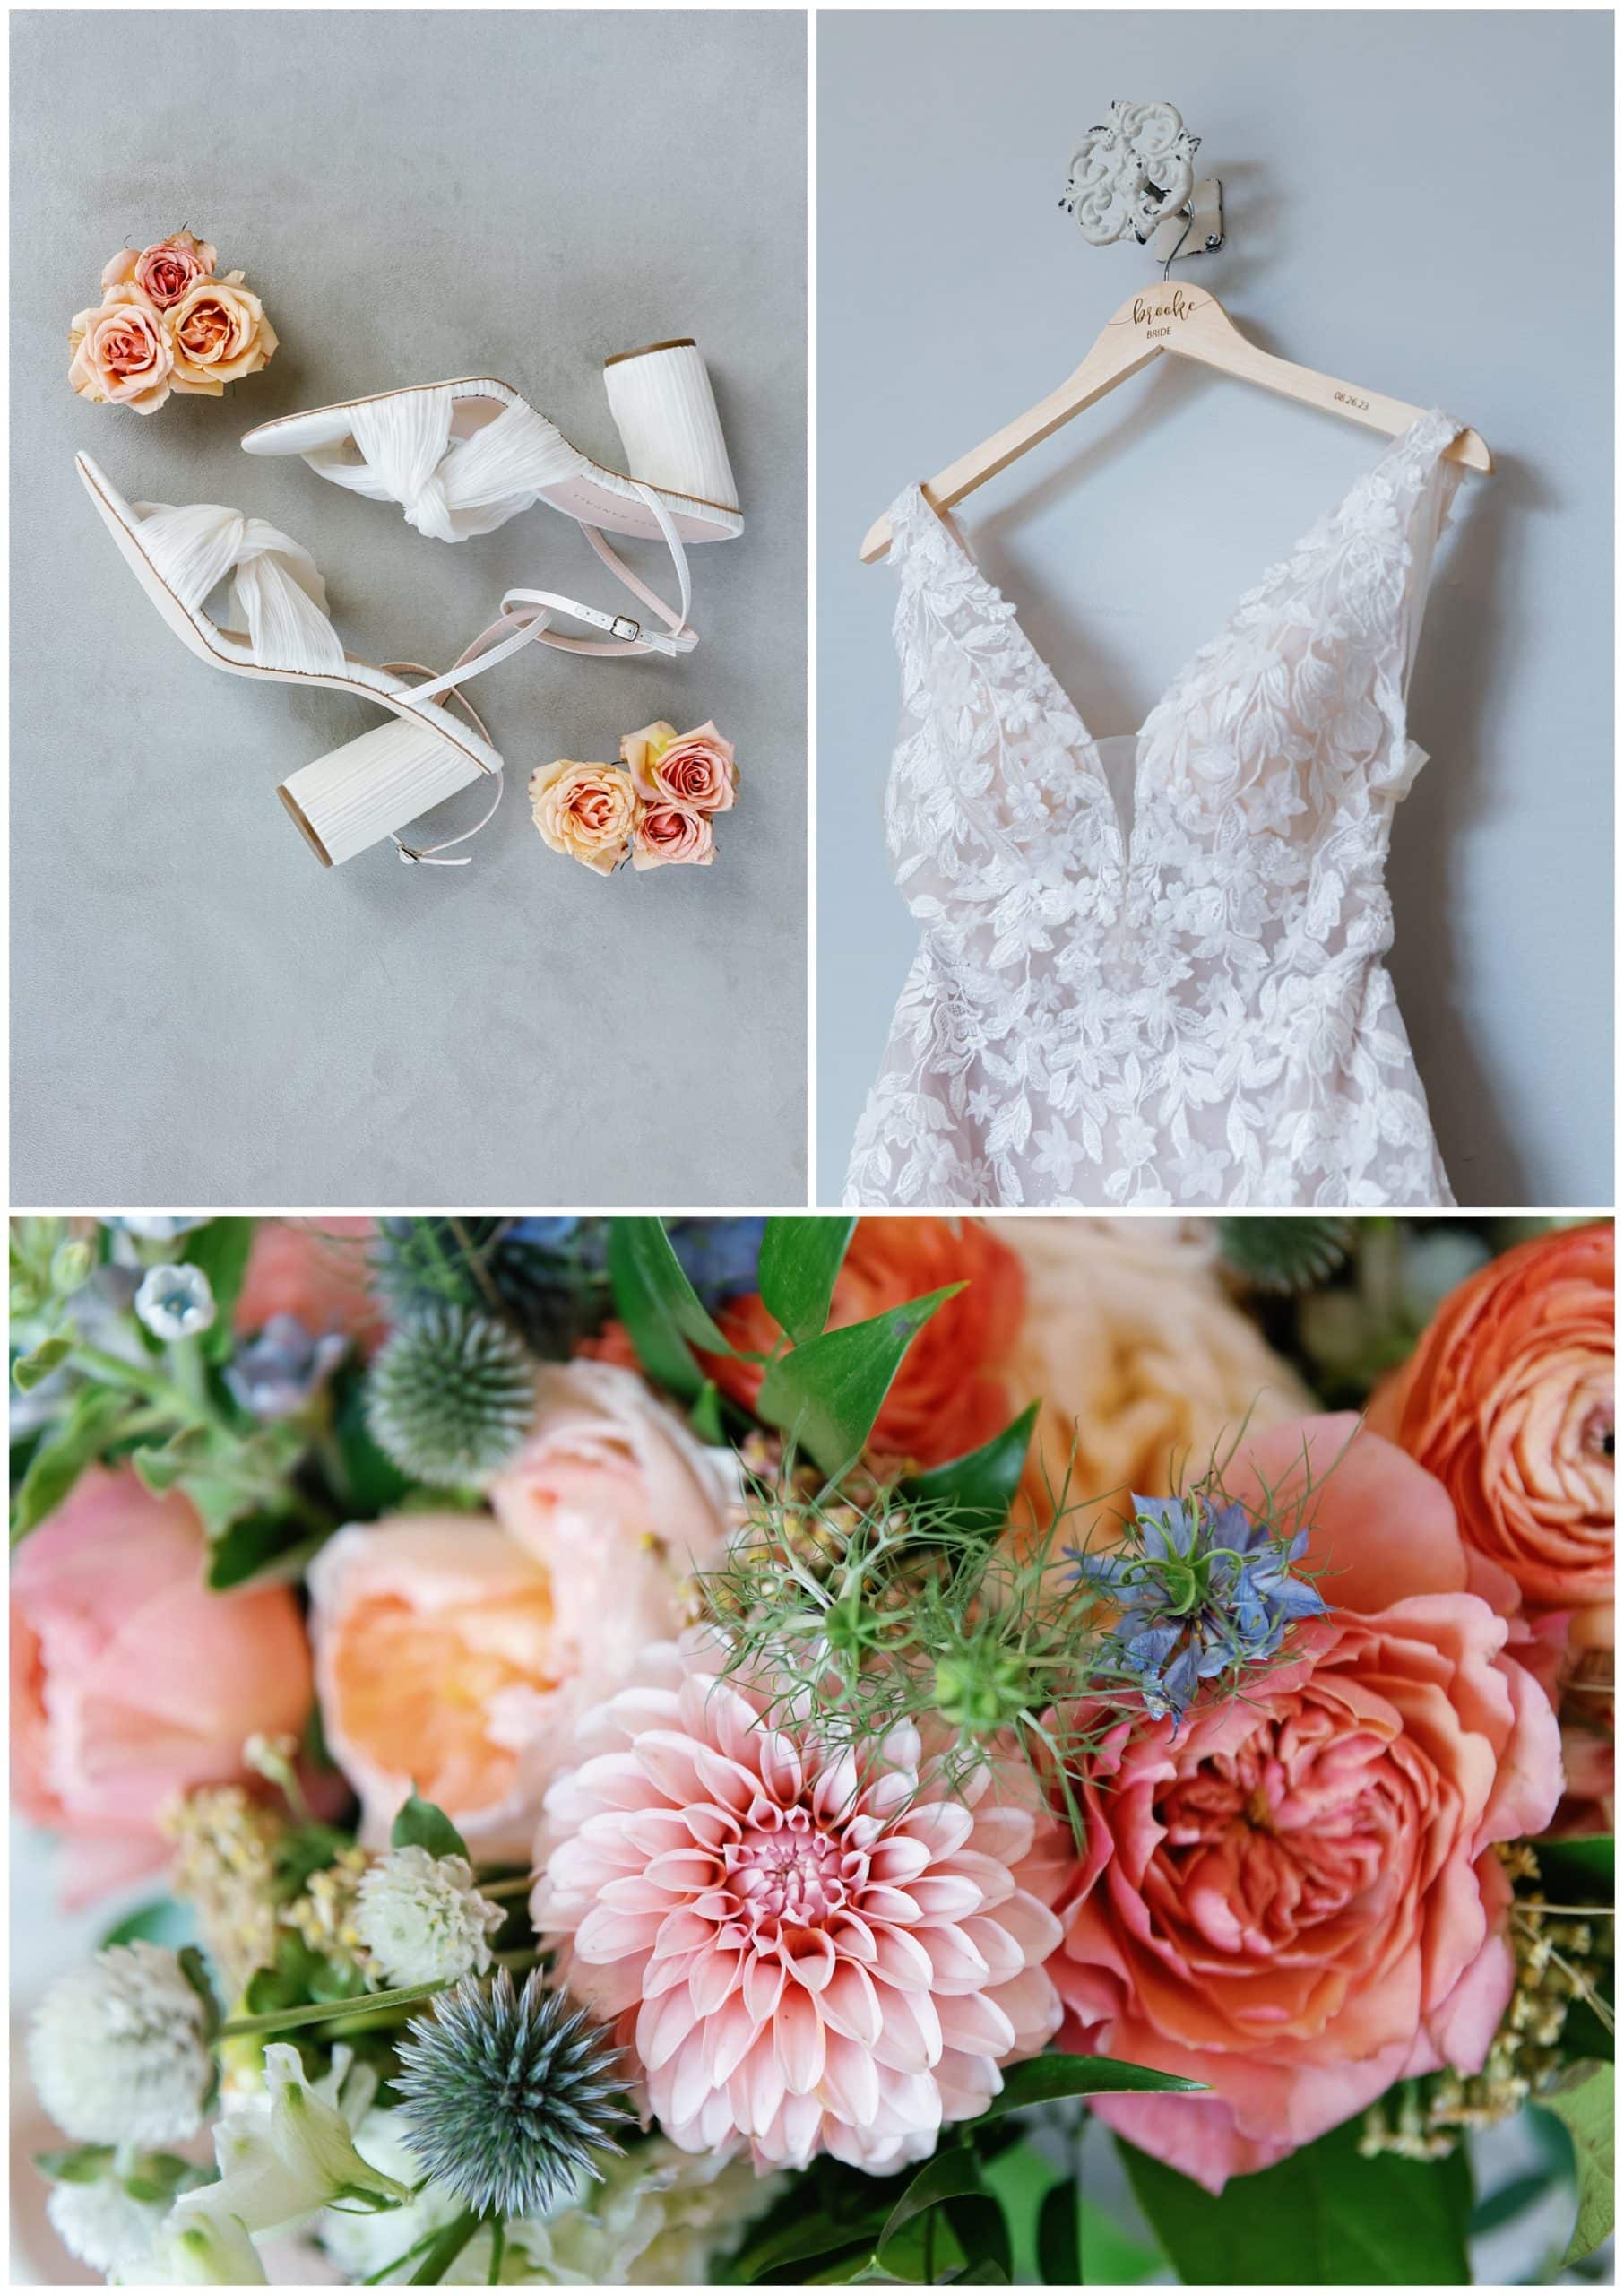 A wedding dress, shoes and flowers are shown in a collage.